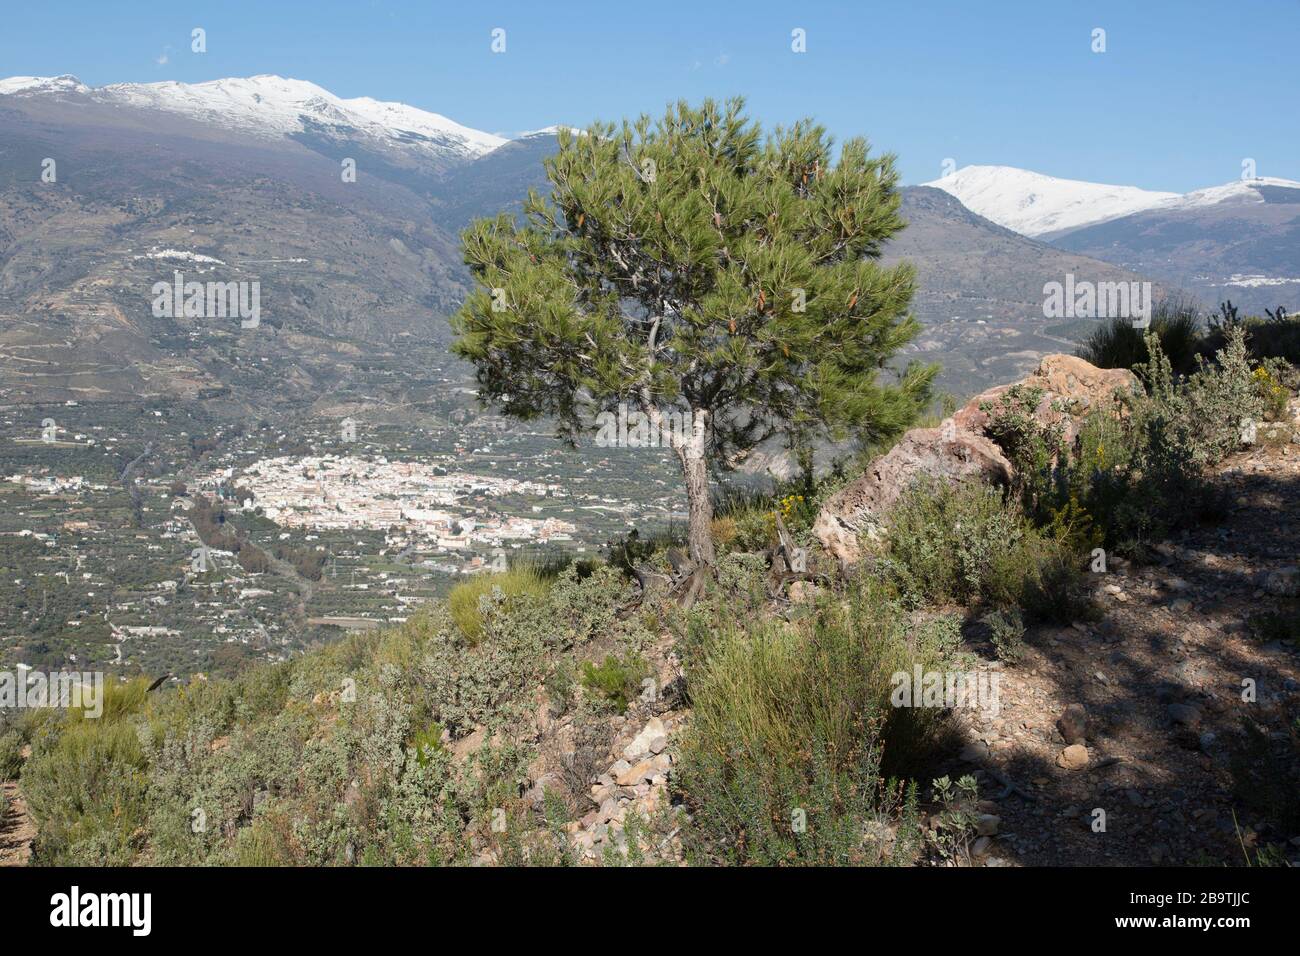 View of Órgiva town in the western Alpujarra valley, below the Sierra Nevada mountains, seen from the Ruta de los Mineros hiking trail. Granada, Andal Stock Photo